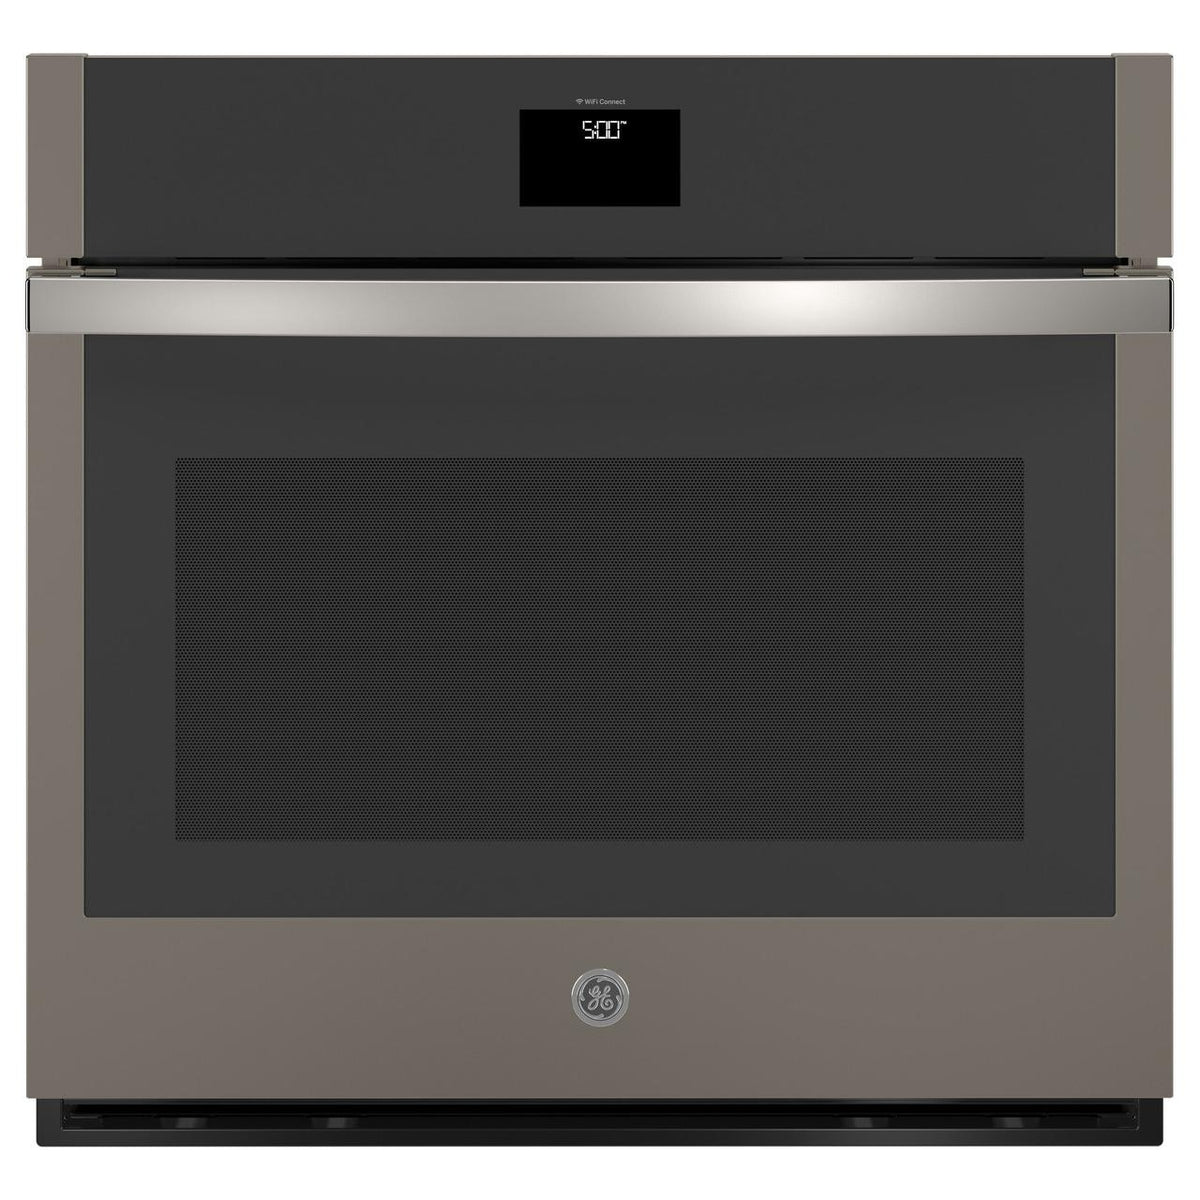 30-inch, 5.0 cu. ft. built-in Single Wall Oven with True European Convection JTS5000EVES IMAGE 1